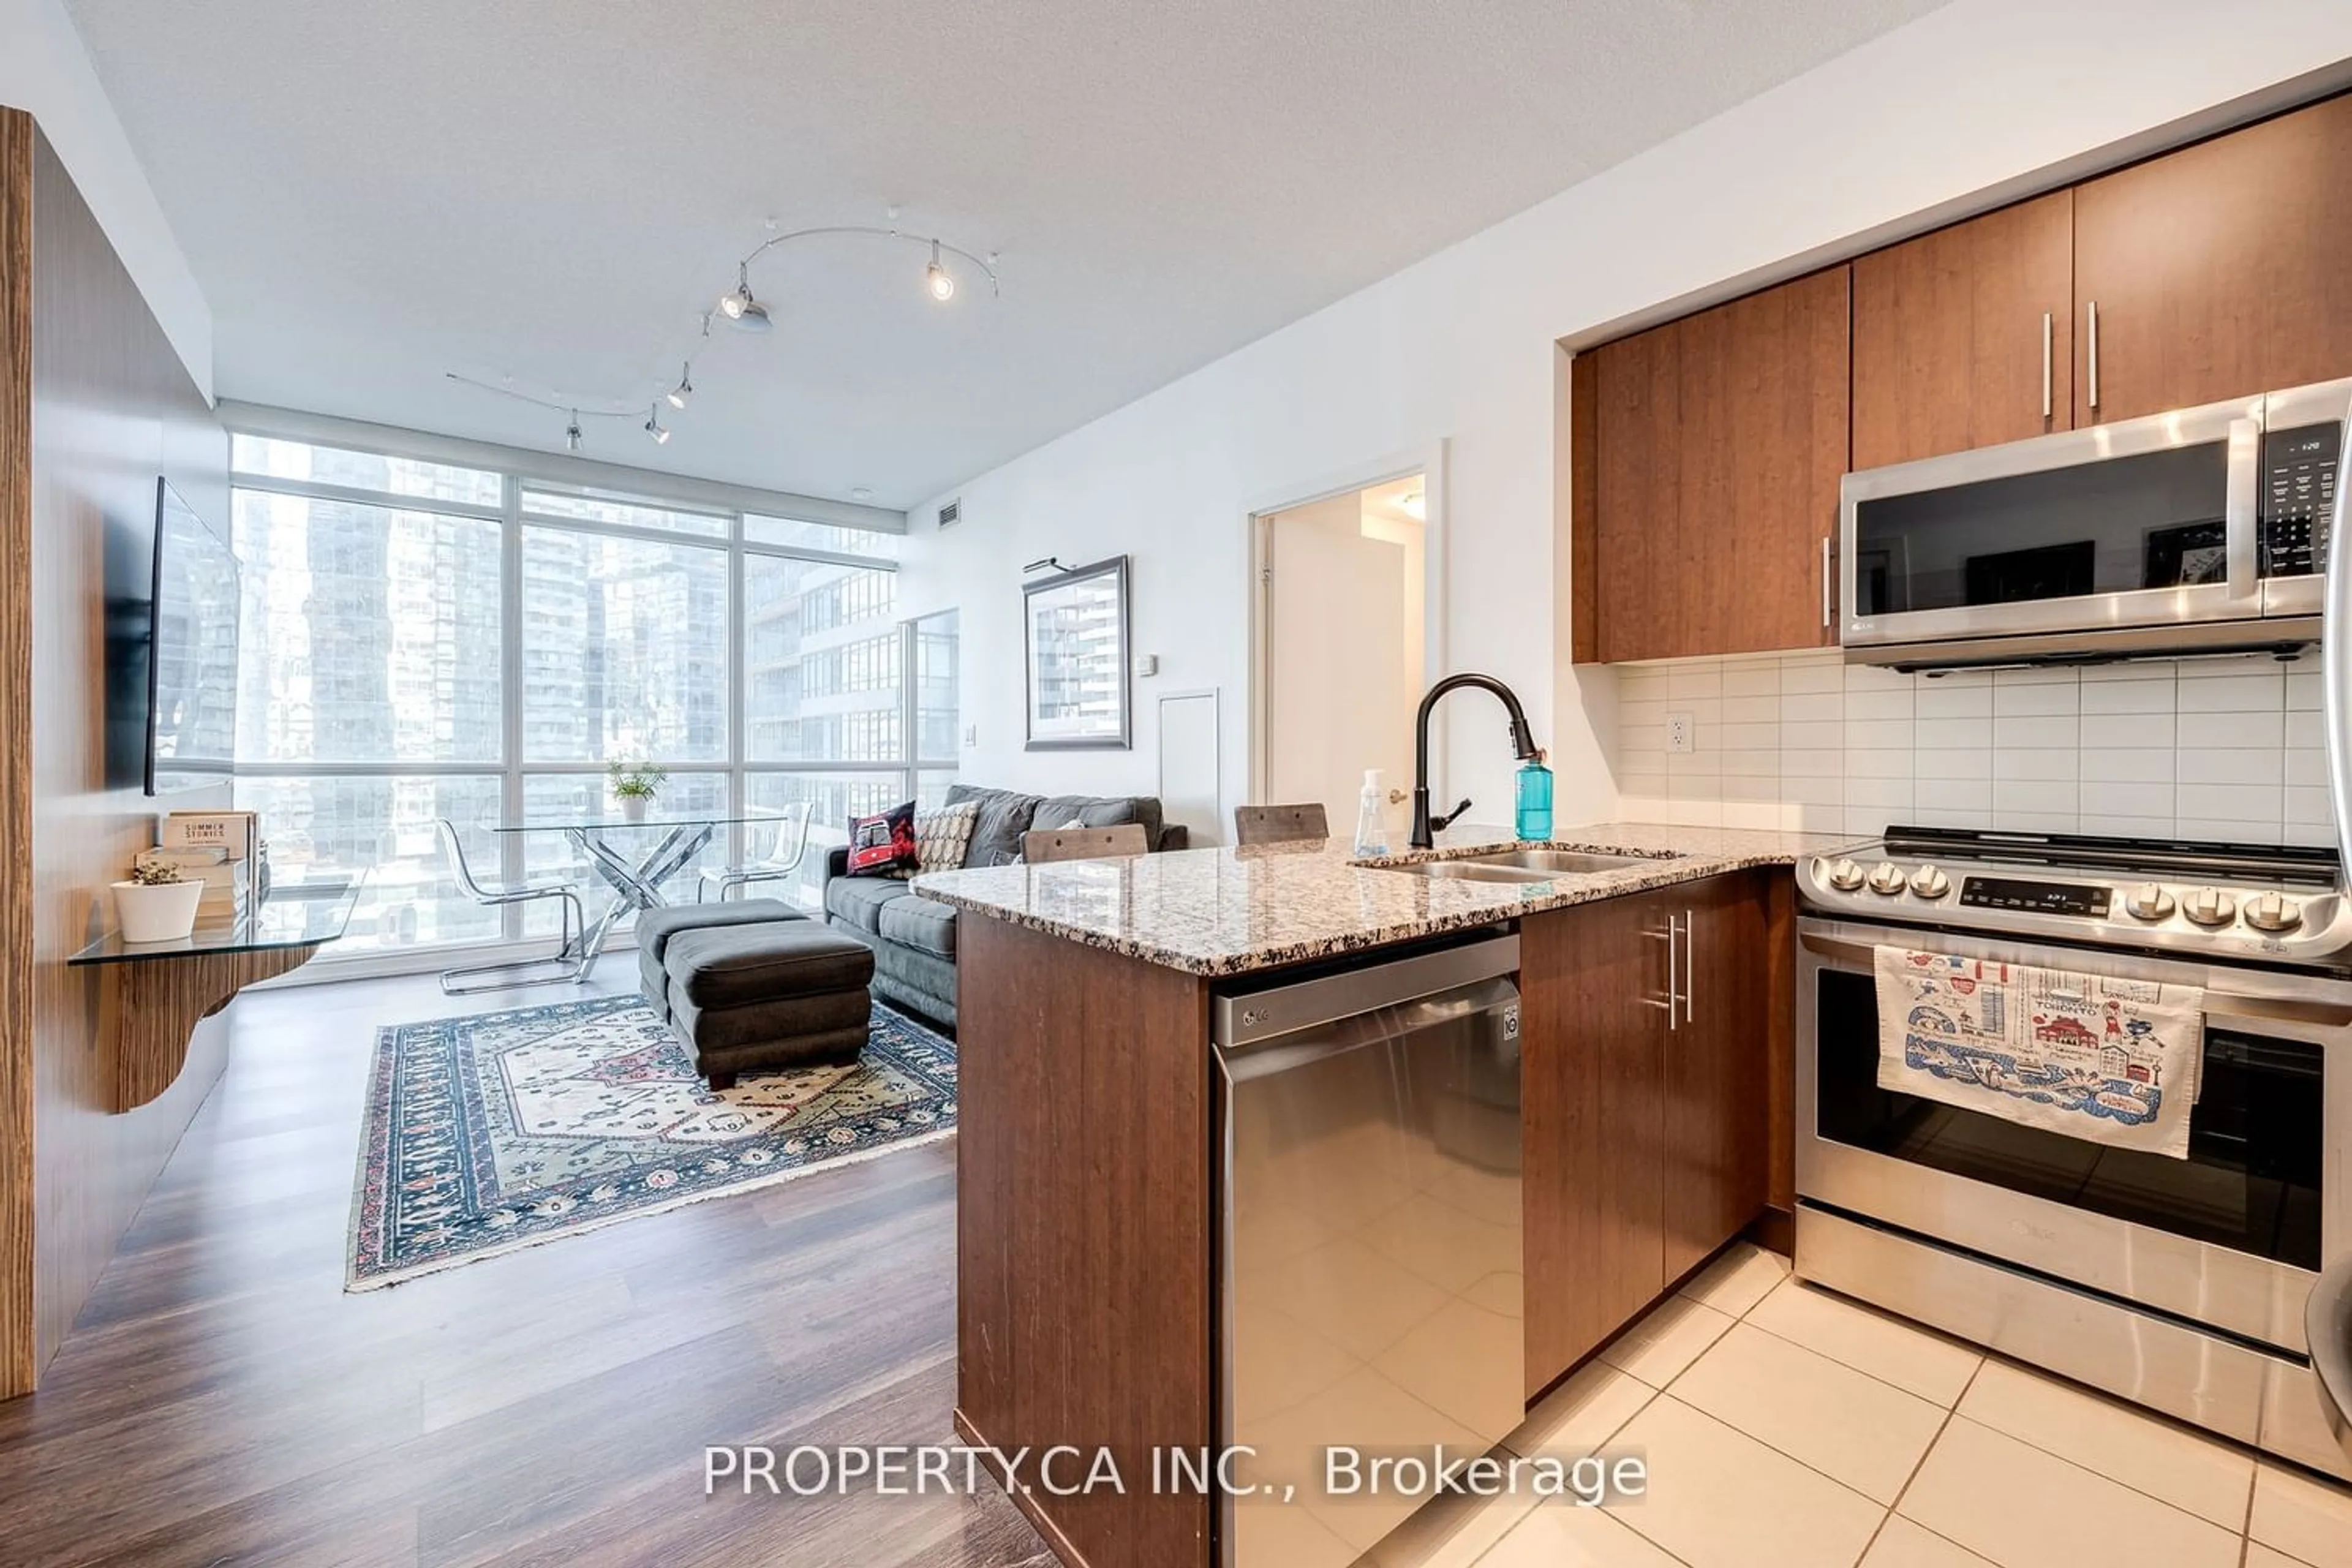 Kitchen with laundary machines for 65 Bremner Blvd #1501, Toronto Ontario M5J 0A7